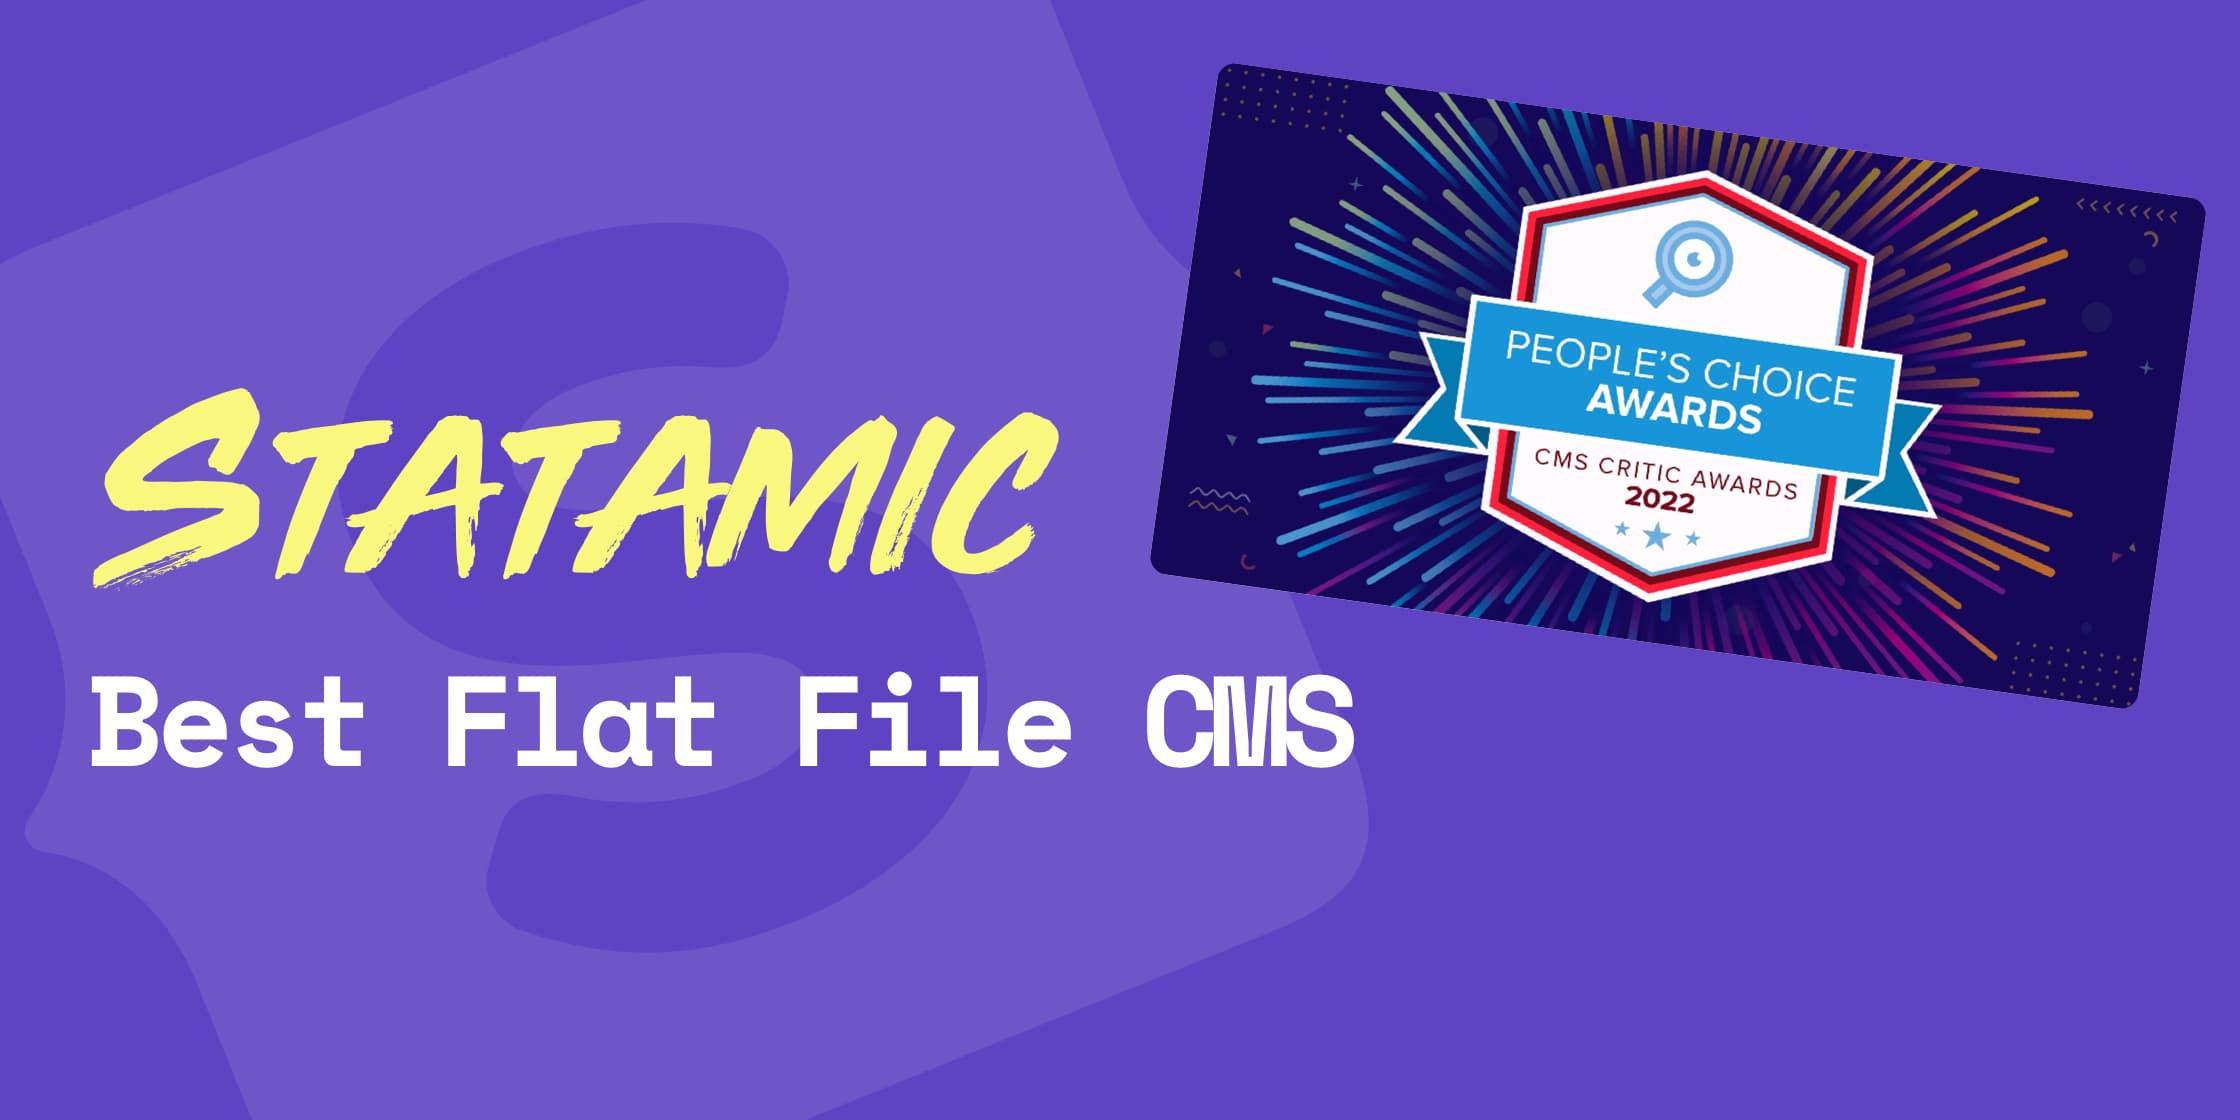 Statamic won CMS Critic People’s Choice Award for "Best Flat File CMS" for the second time in a row.